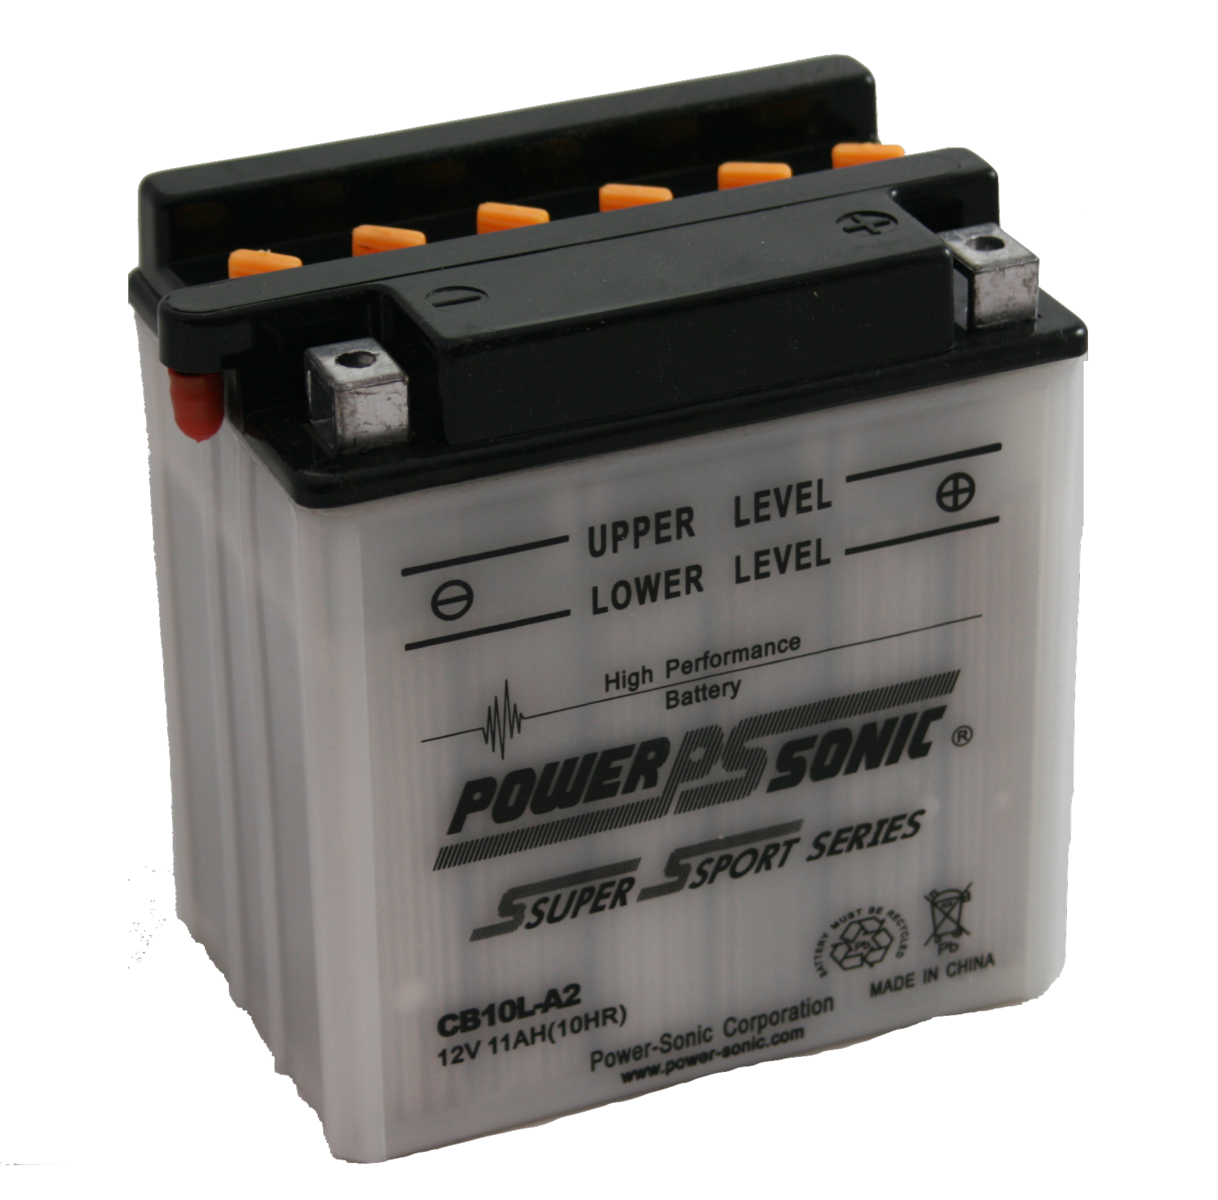 Battery limited. YGFC-02cb-Ah. Radial Appliance, wet Cell Battery. Cb10/30. Tab yb10l-a2 (11 а·ч).